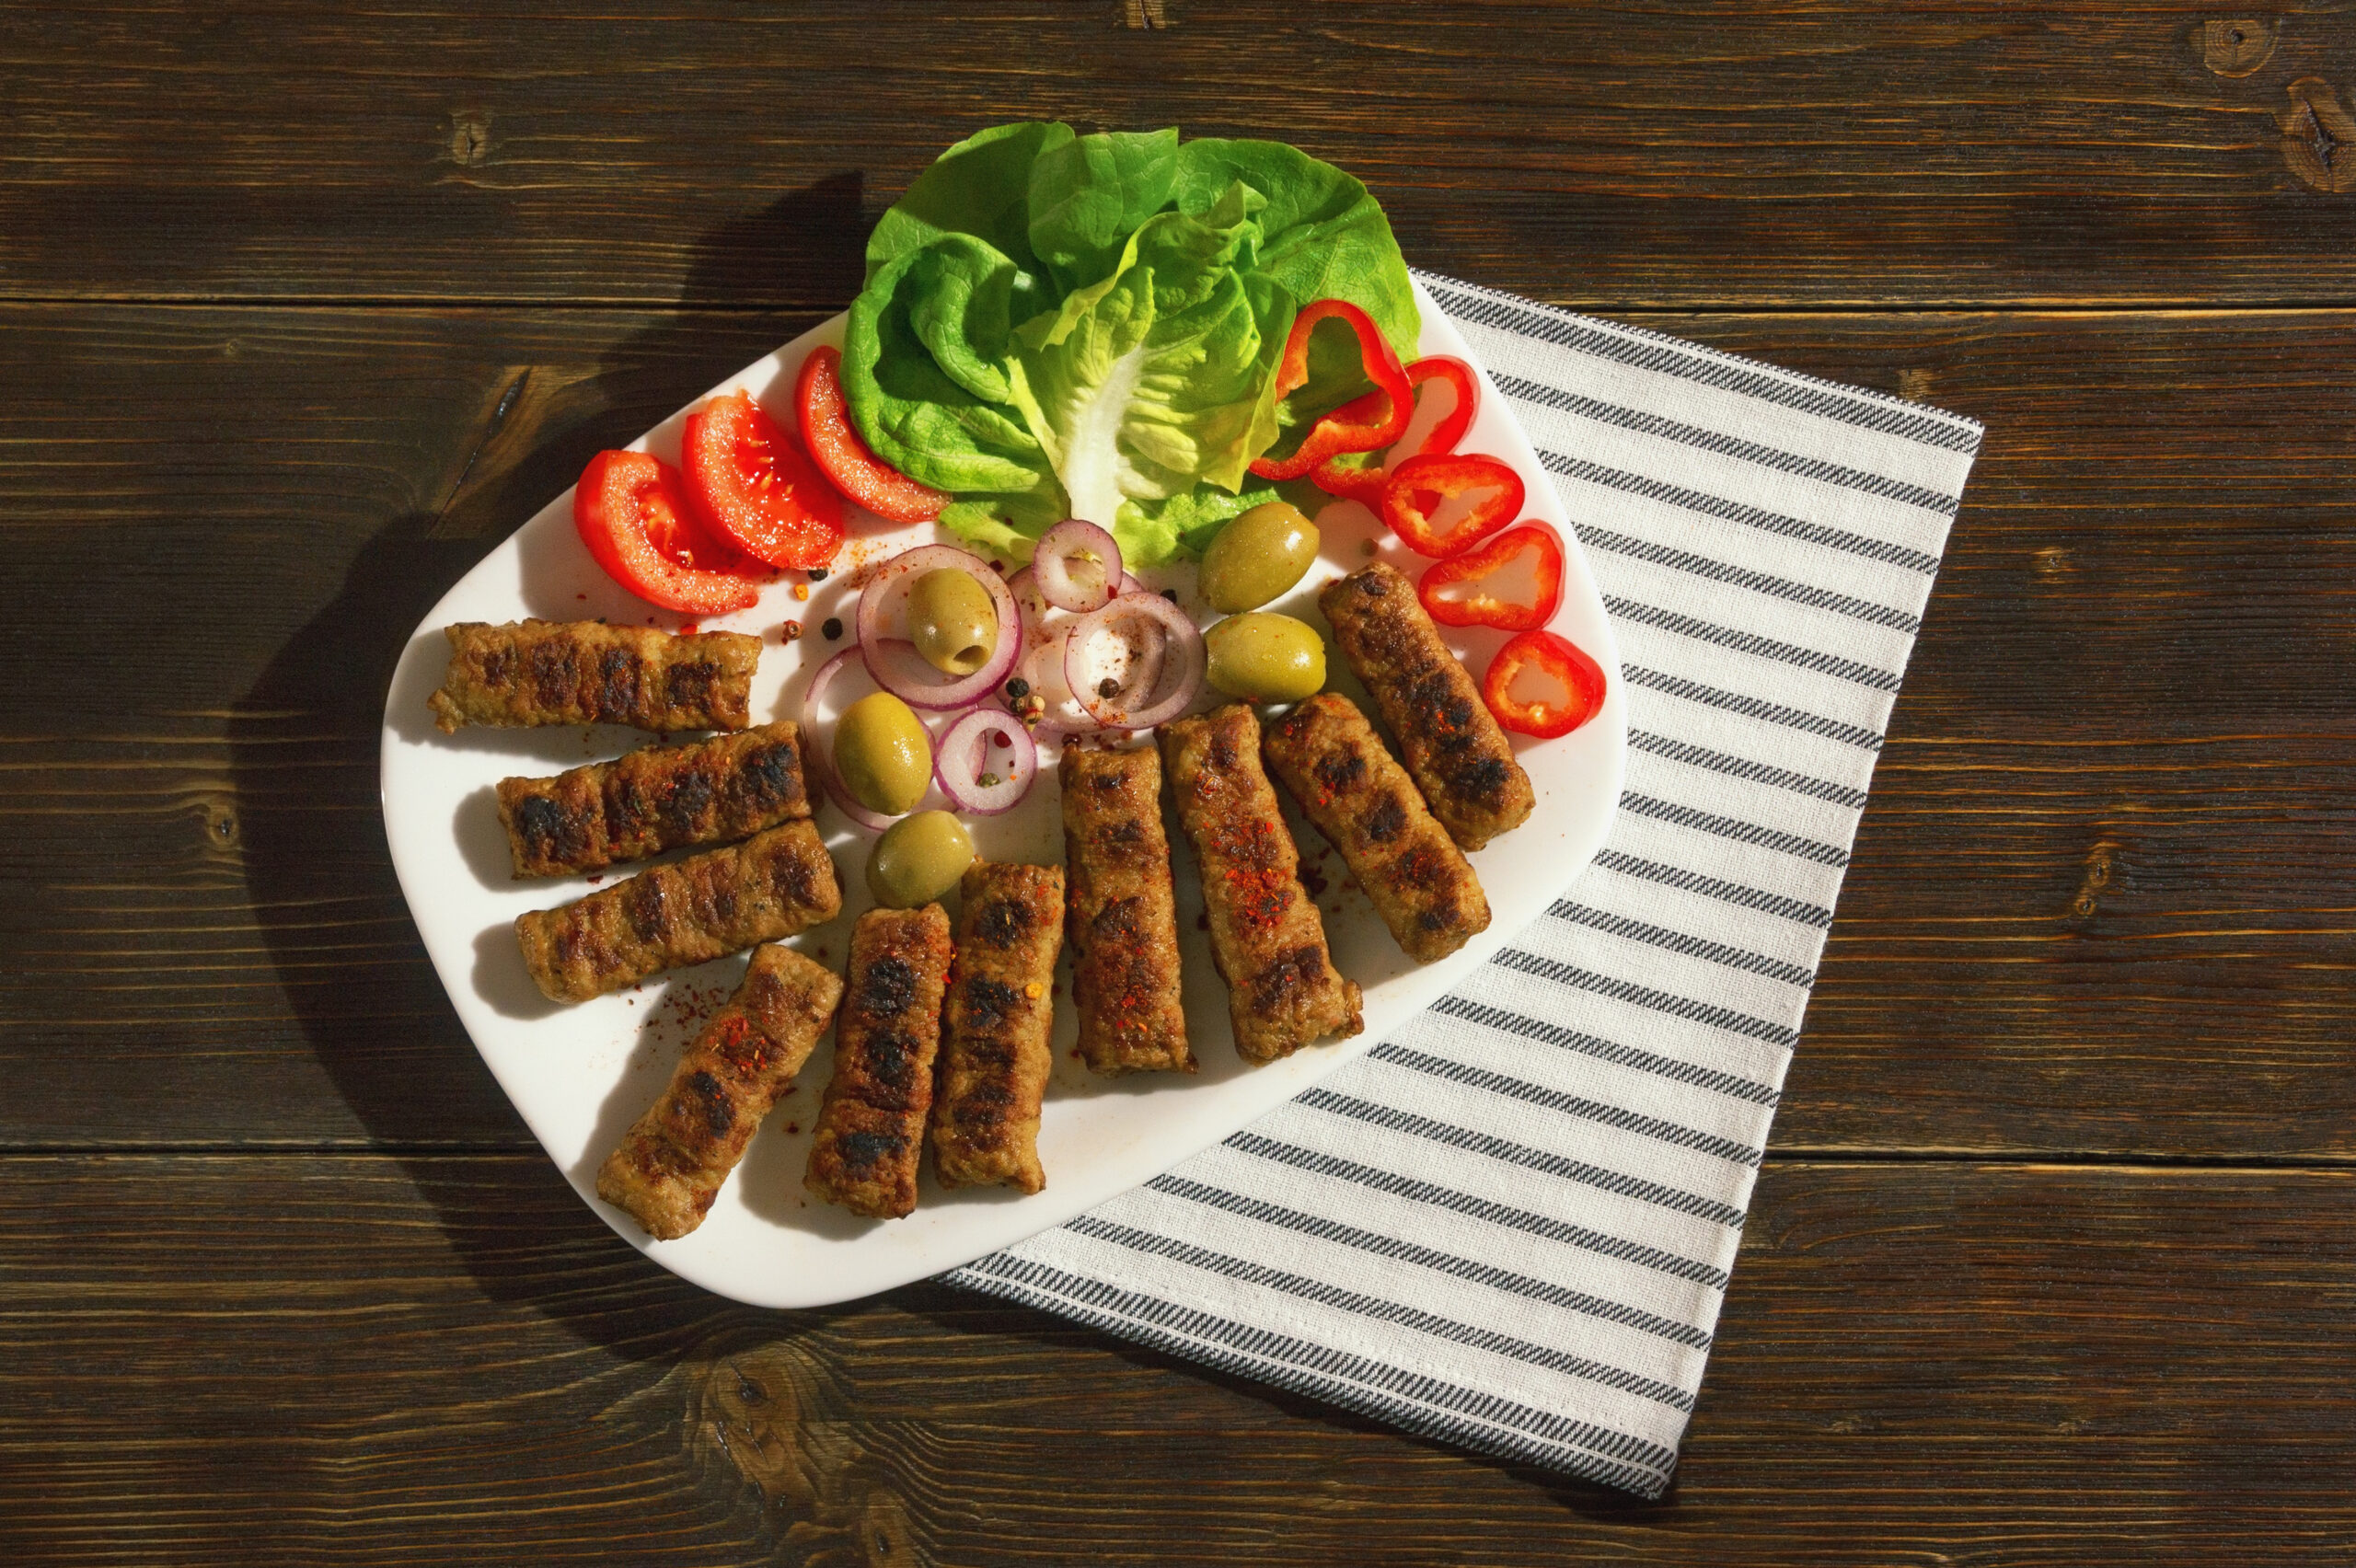 Balkan cuisine. Cevapi - grilled dish of minced meat- with vegetables. Dark rustic background. Flat lay